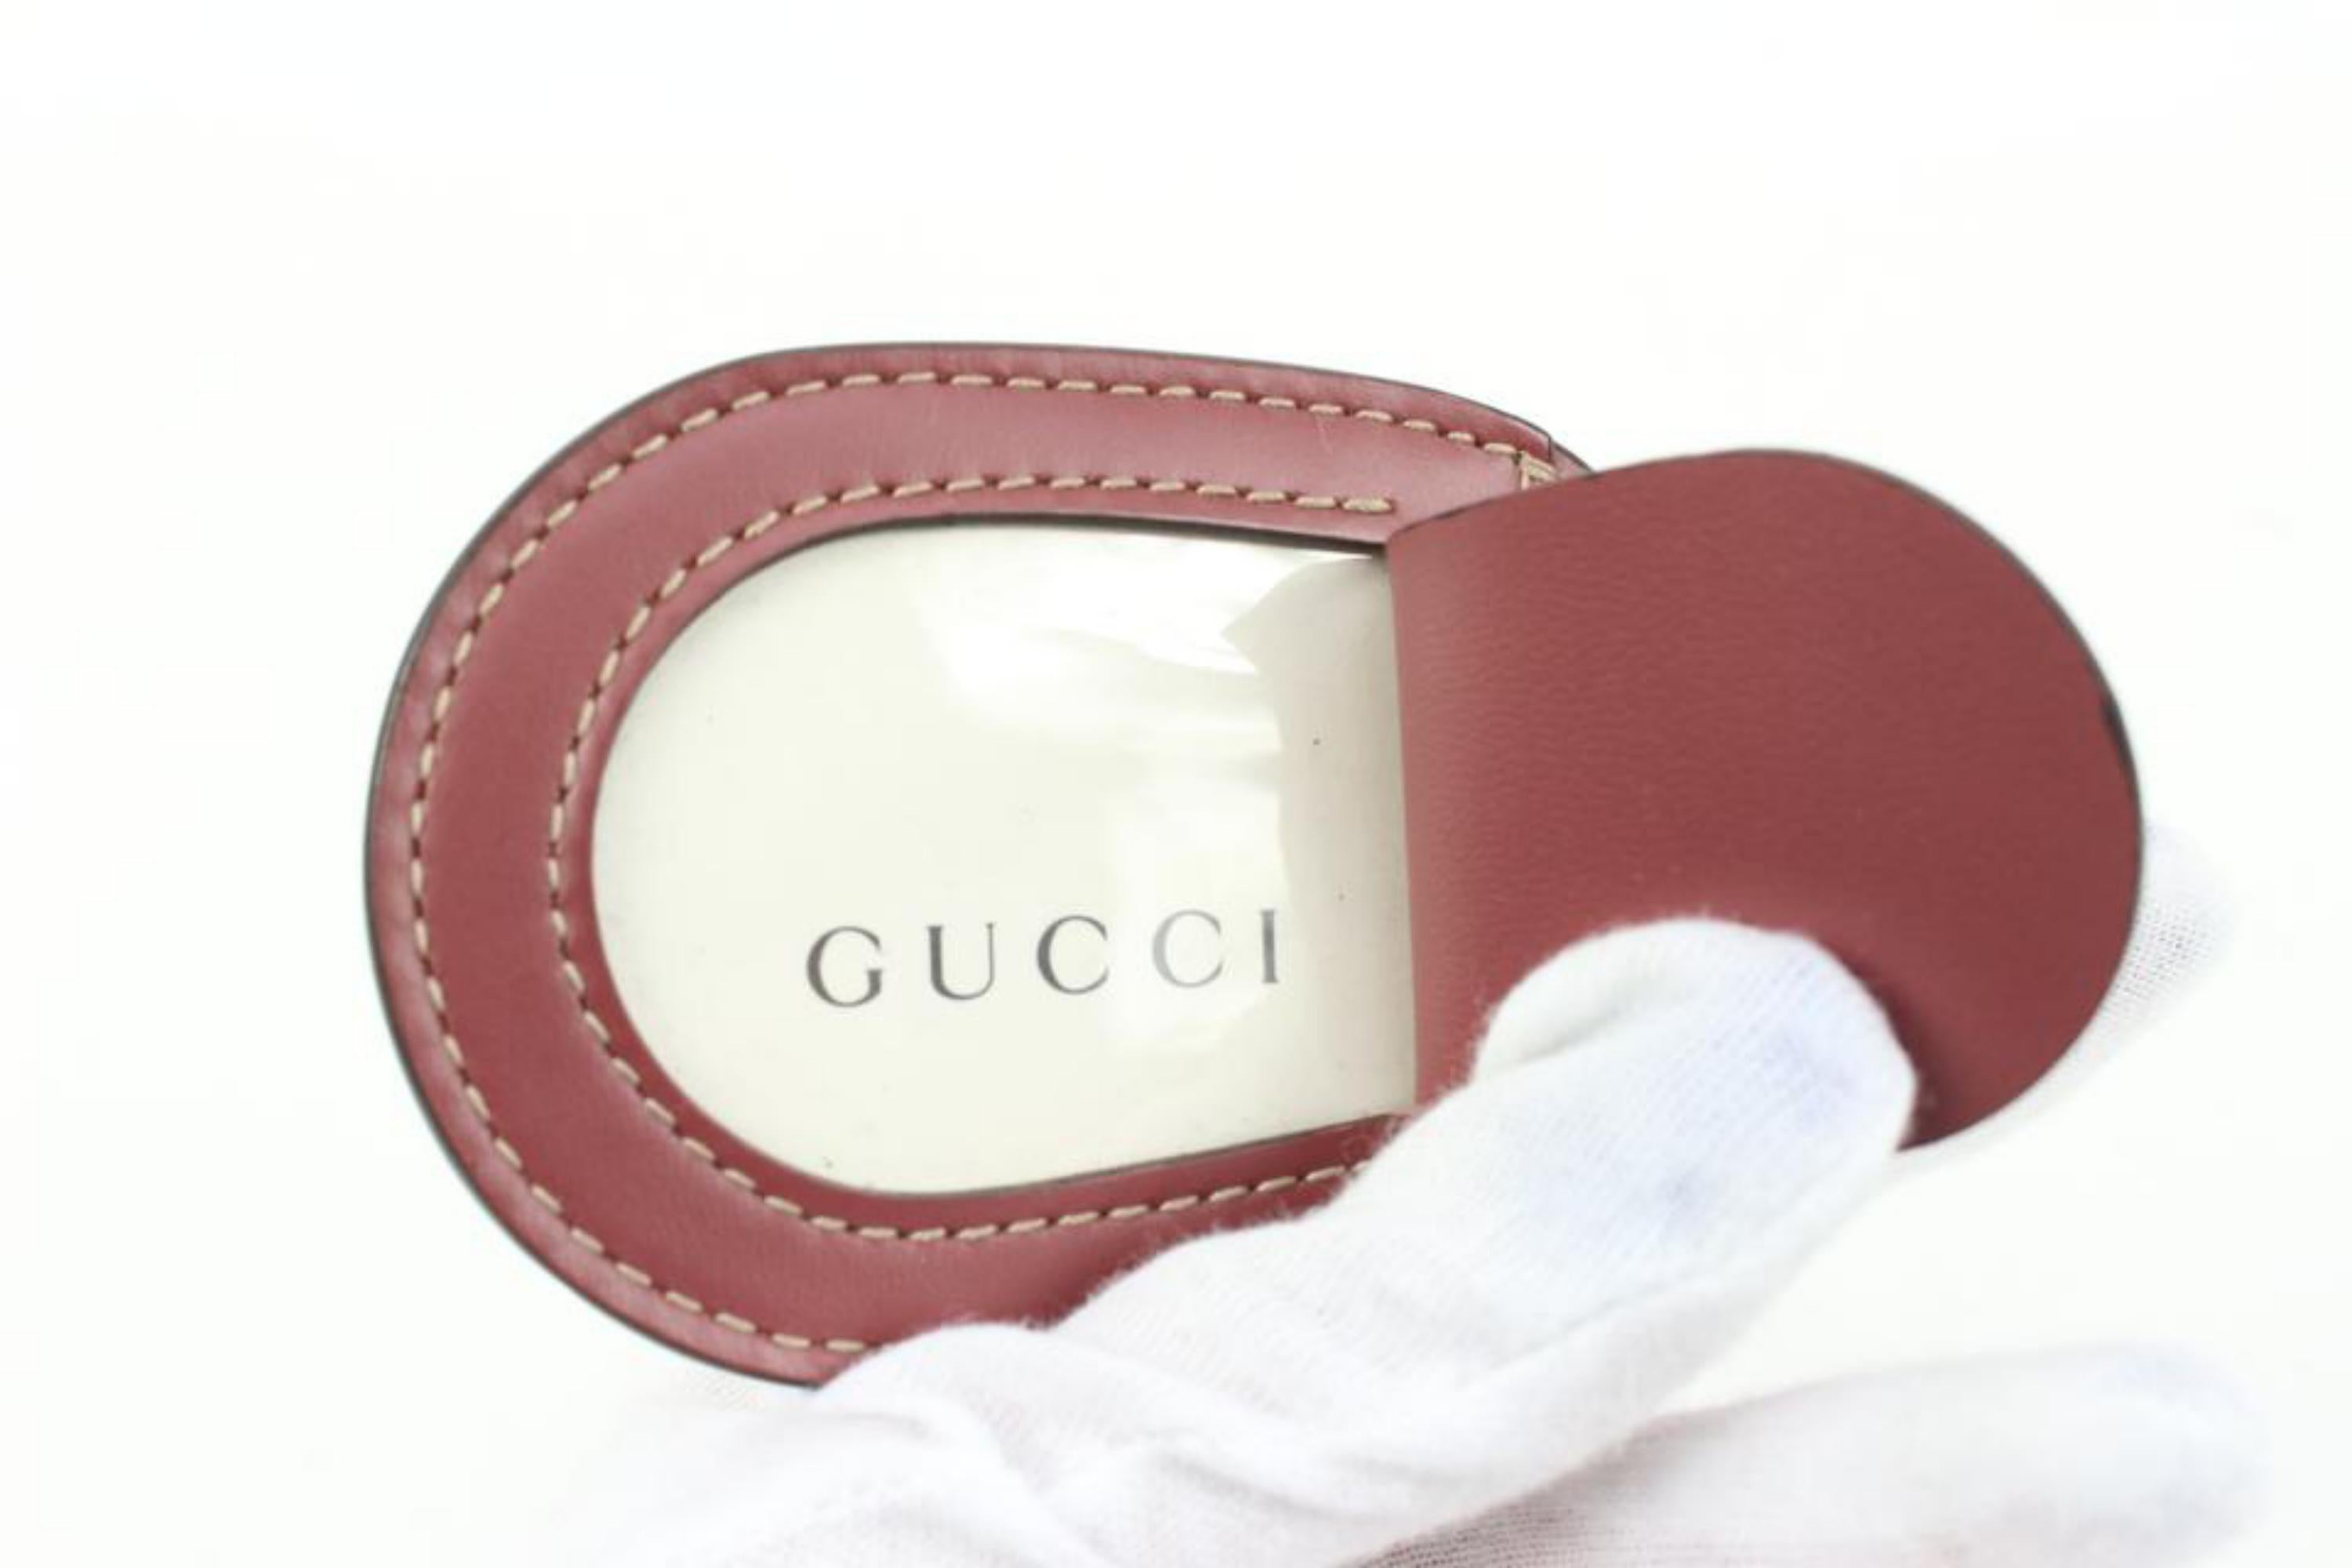 Gucci Mauve Clochette Luggage Tag from Reversible Supreme GG Tote s330g21
Made In: Italy
Measurements: Length:  2.4